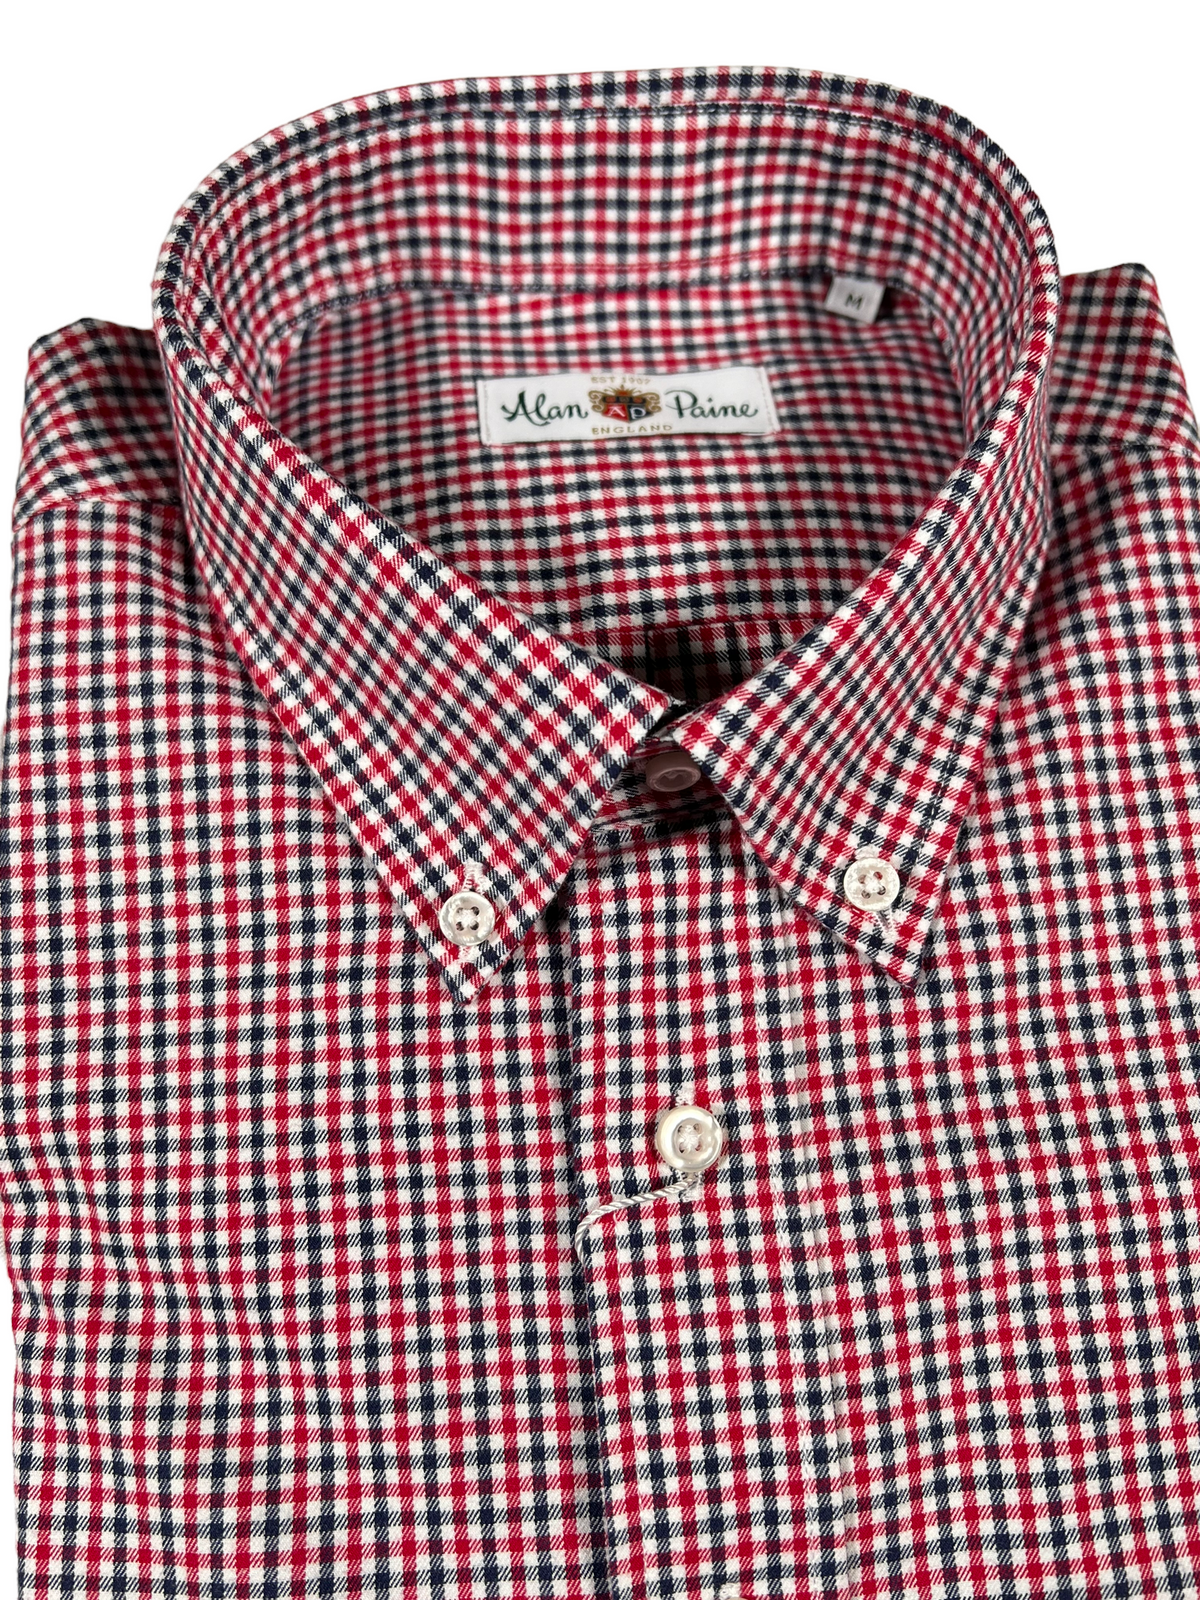 ALAN PAINE LS CLASSIC FIT SHIRT - RED & BLUE CHECK